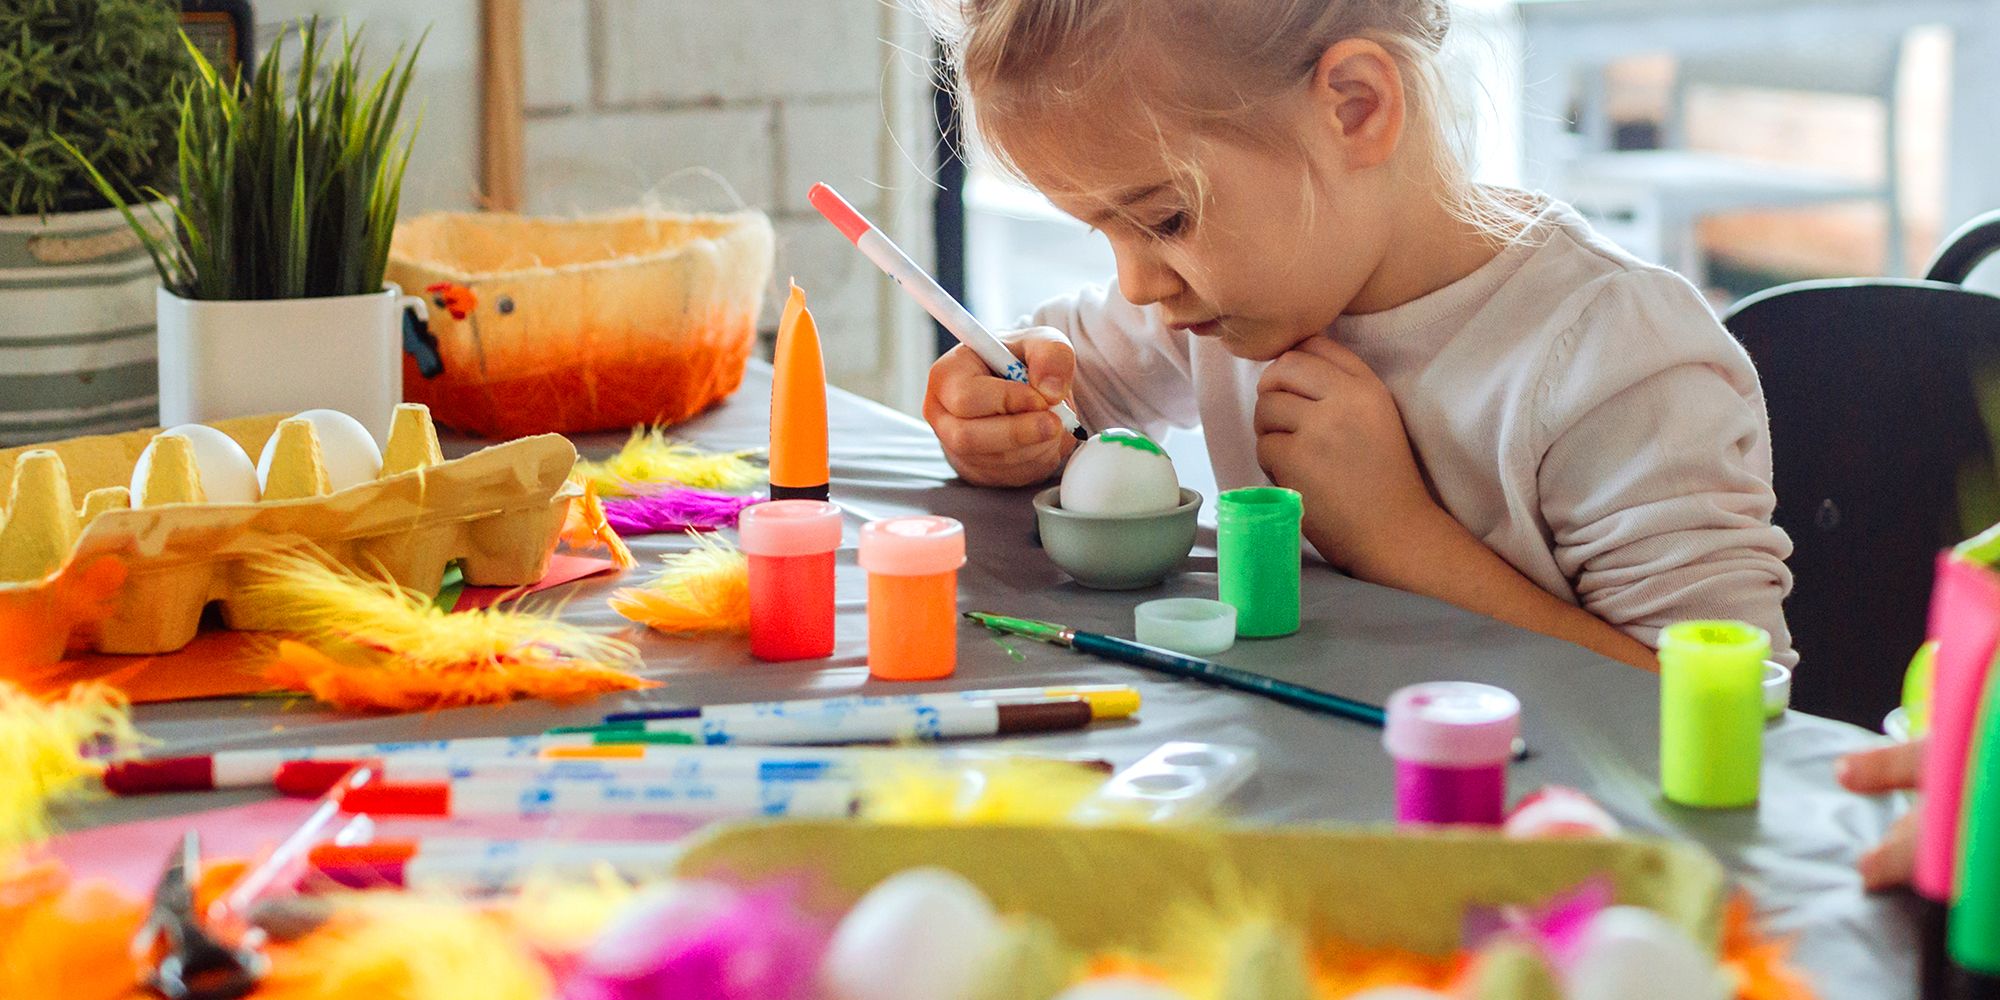 20 Easter Egg Decorating Kits for Your Family's Craftiest, Most